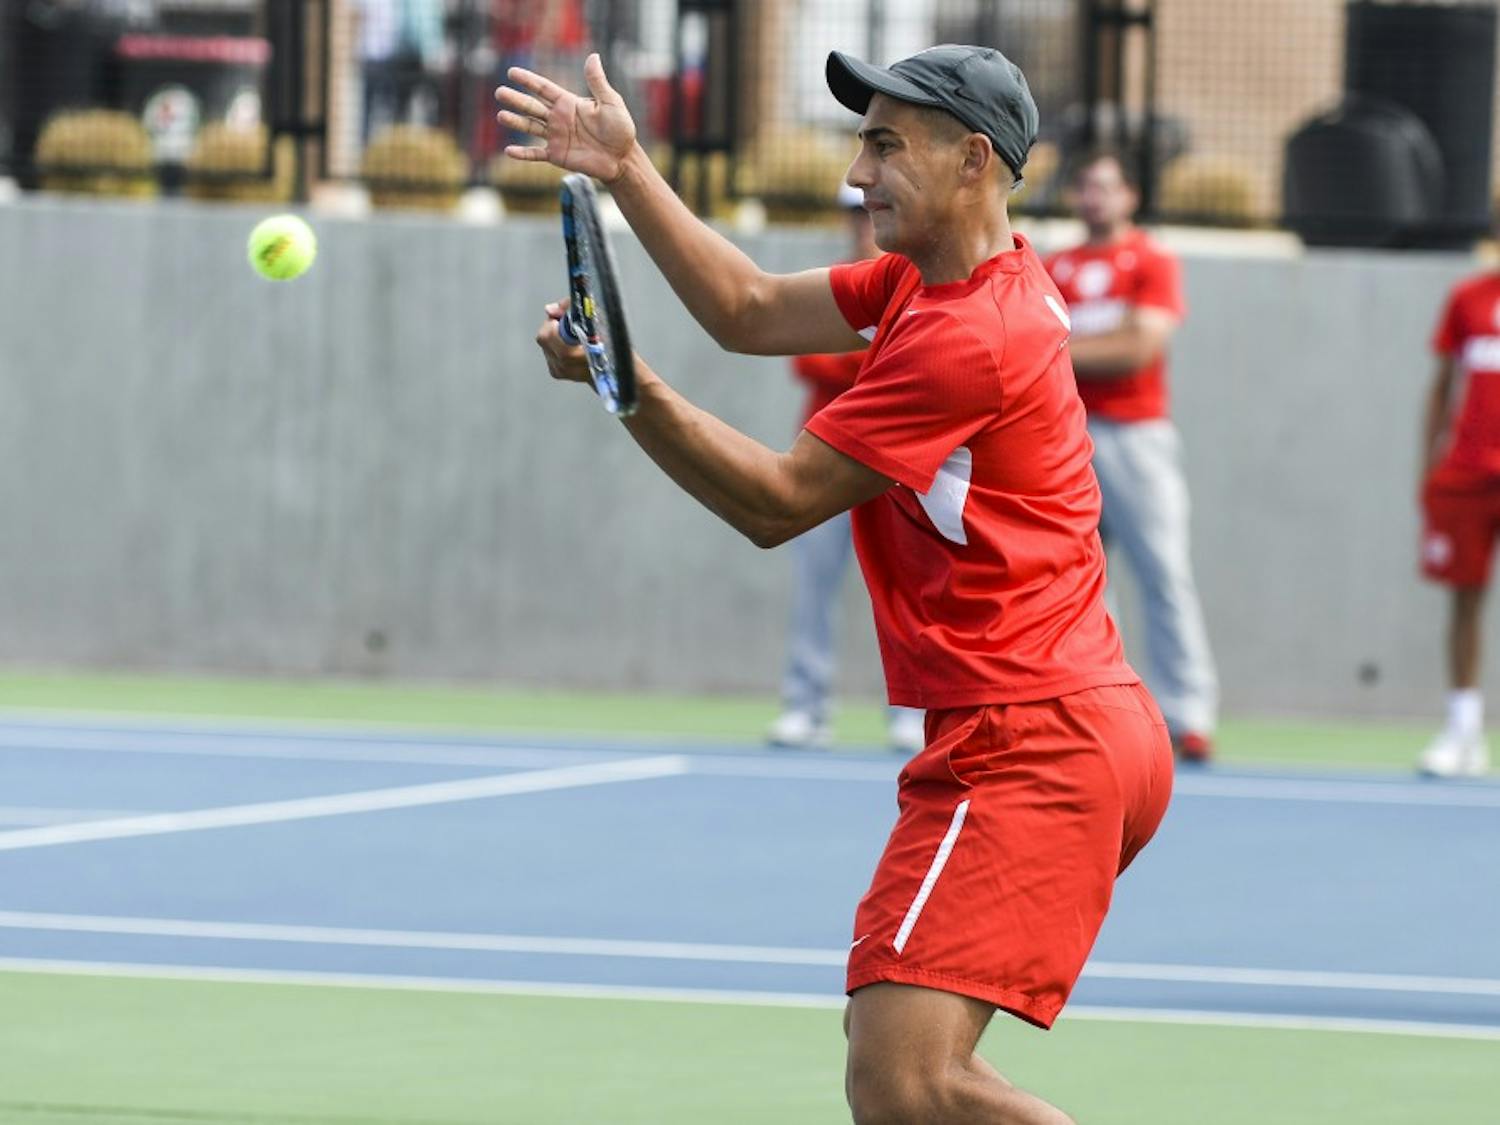 Sophomore Jorge Escutia braces to return the ball at the McKinnon Family Tennis Stadium. The Lobos will play Utah State and Boise State this weekend in Albuquerque.